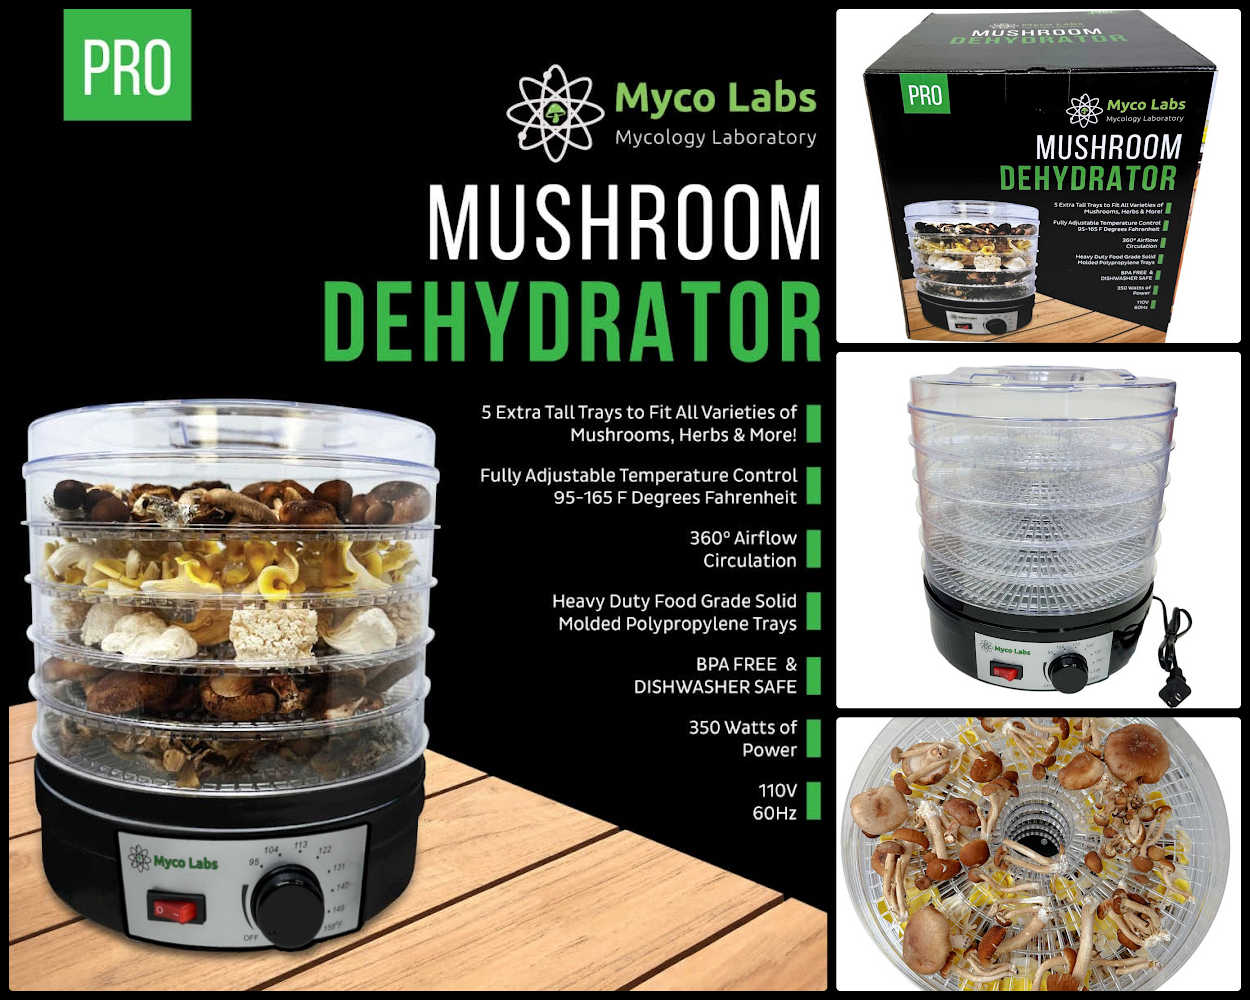 https://www.midwestgrowkits.com/resize/Shared/Images/Product/Mycolabs-350W-Mushroom-Dehydrator-With-Adjustable-Temperature-Control/Dehydrator_collage_web_final_final.jpg?bw=600&w=600